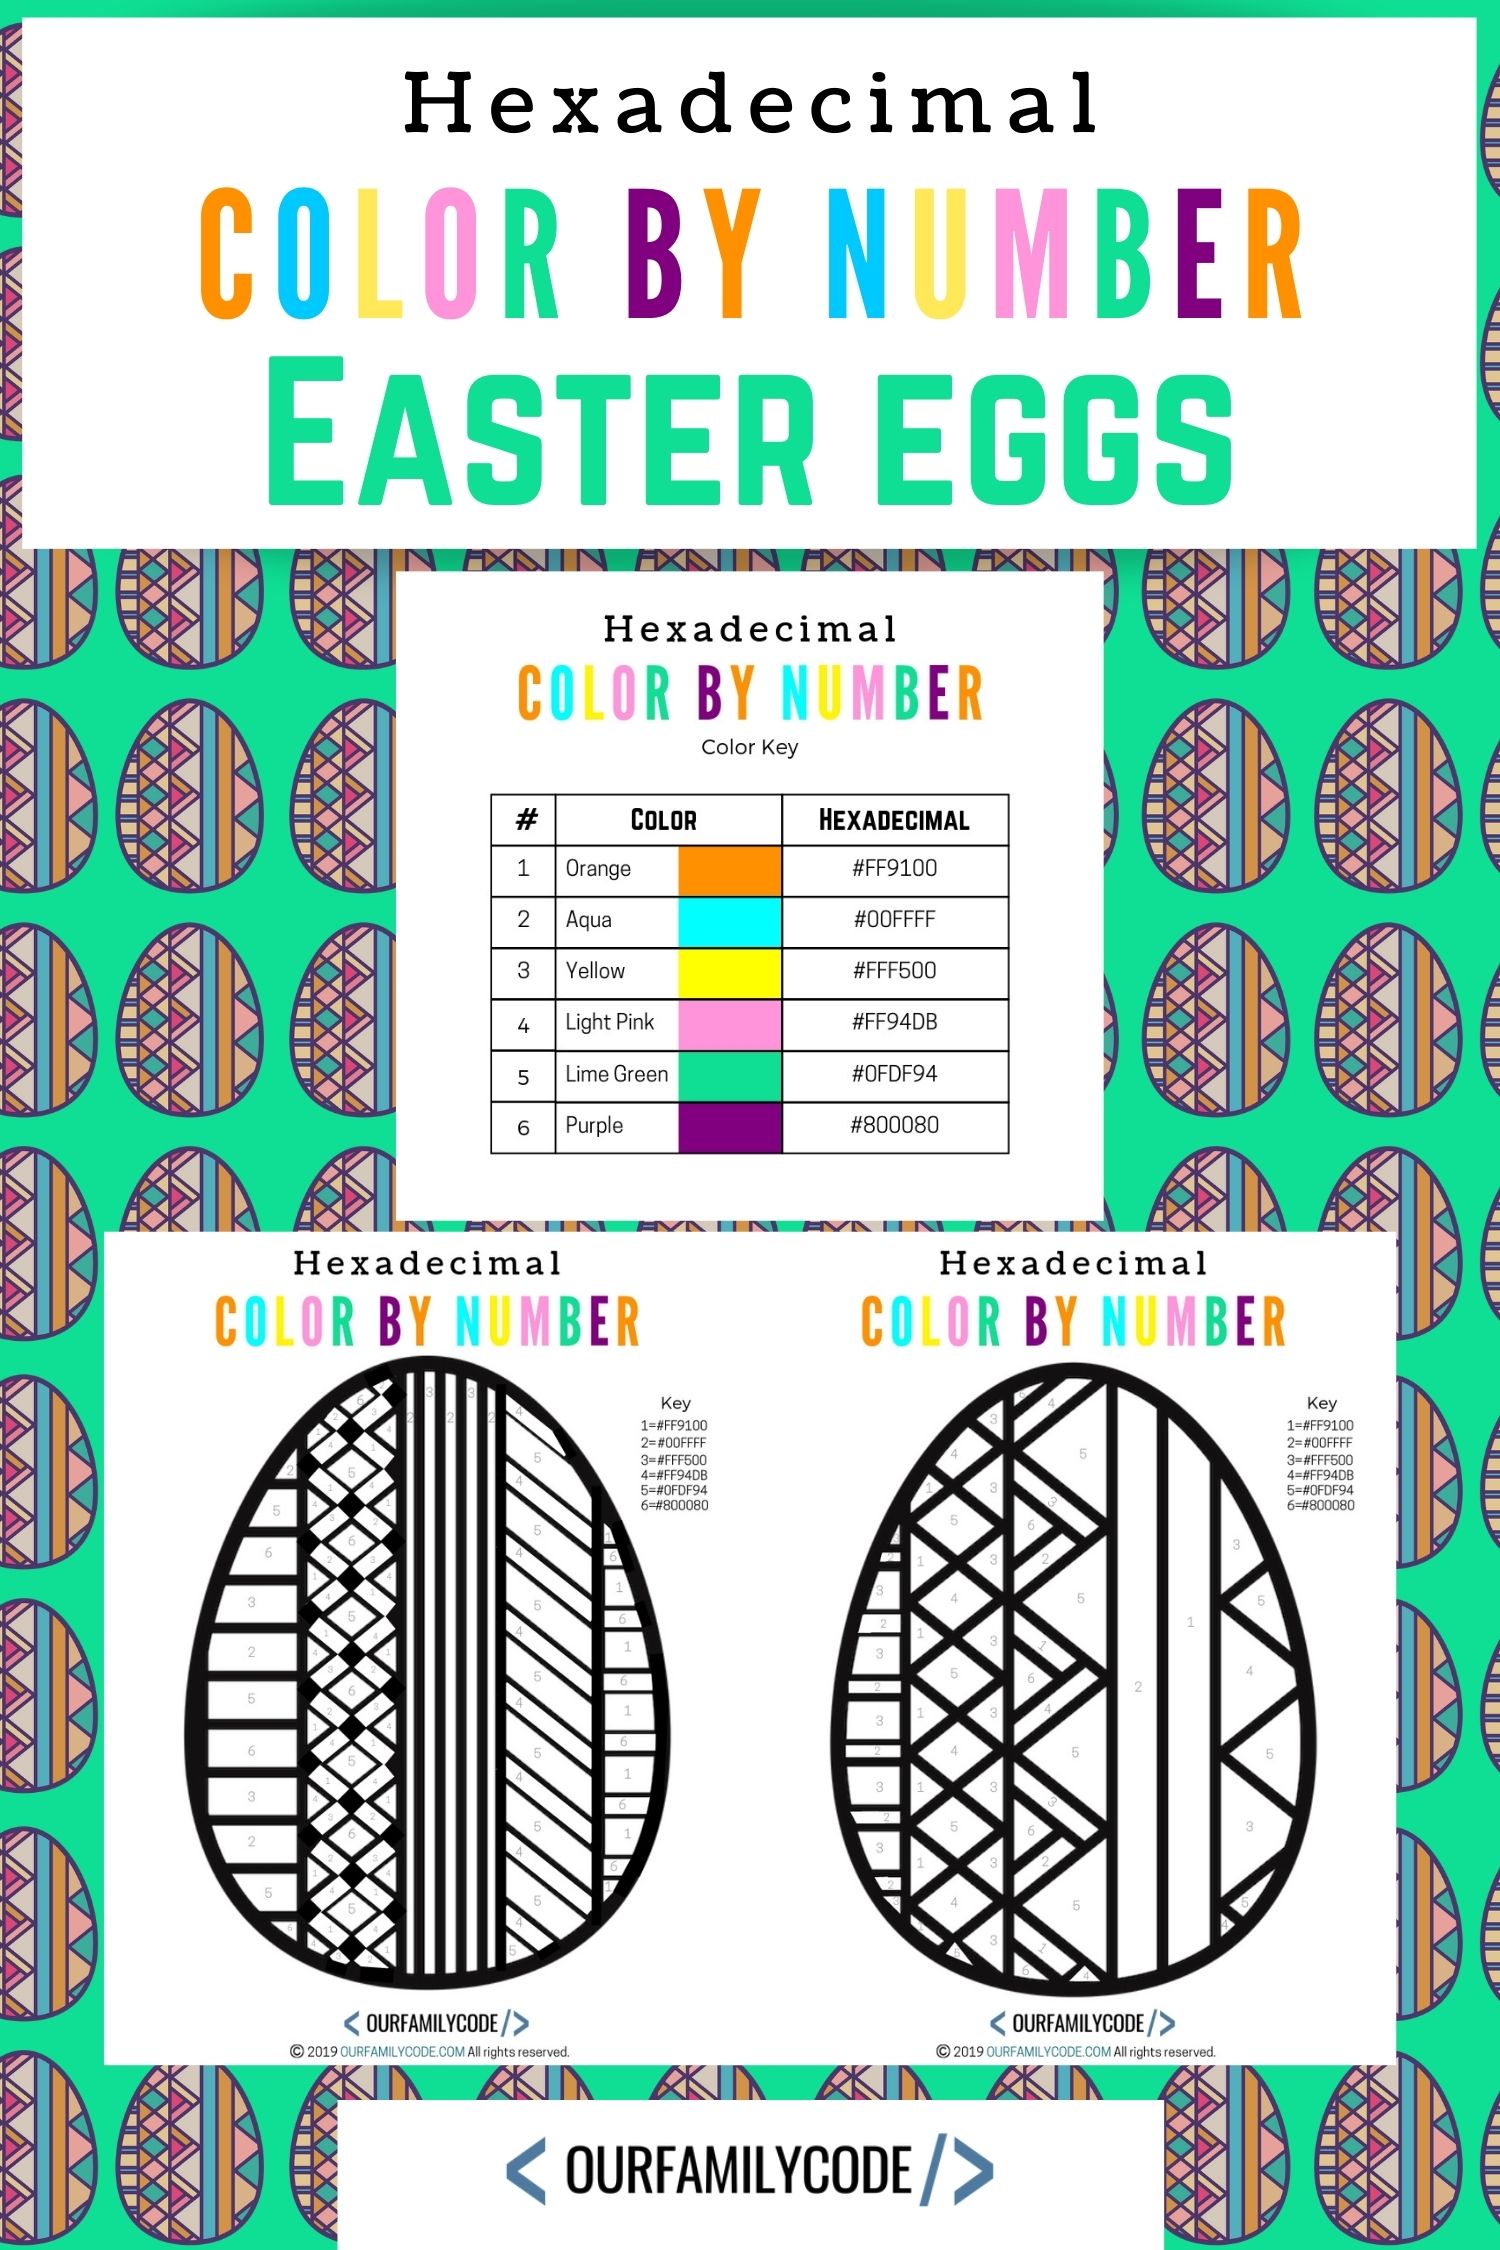 A picture of hexadecimal color by number easter egg worksheets on a green background with Easter eggs.